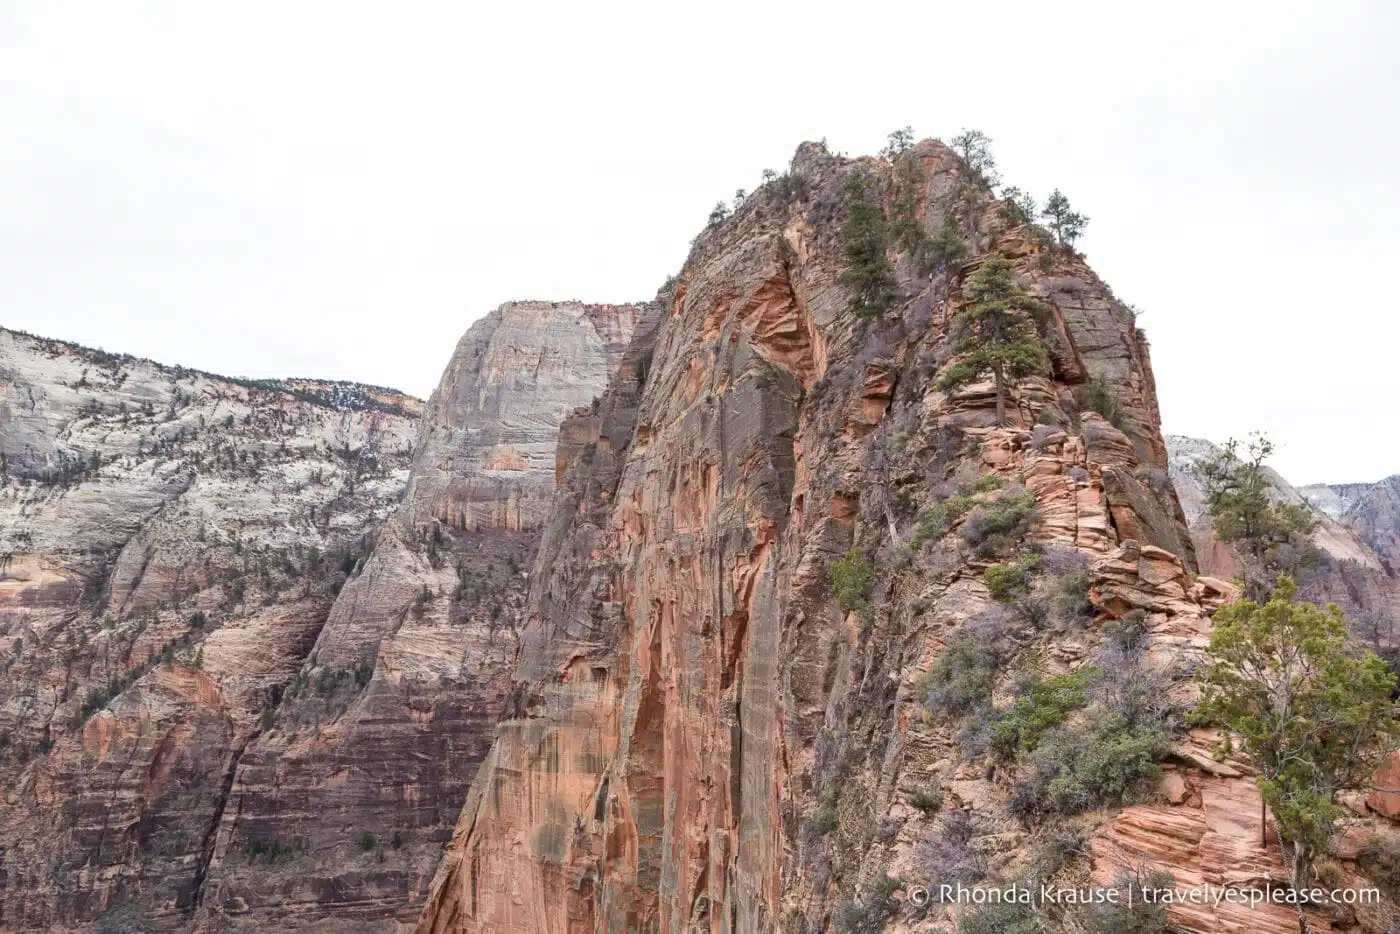 The trail up to Angel's Landing